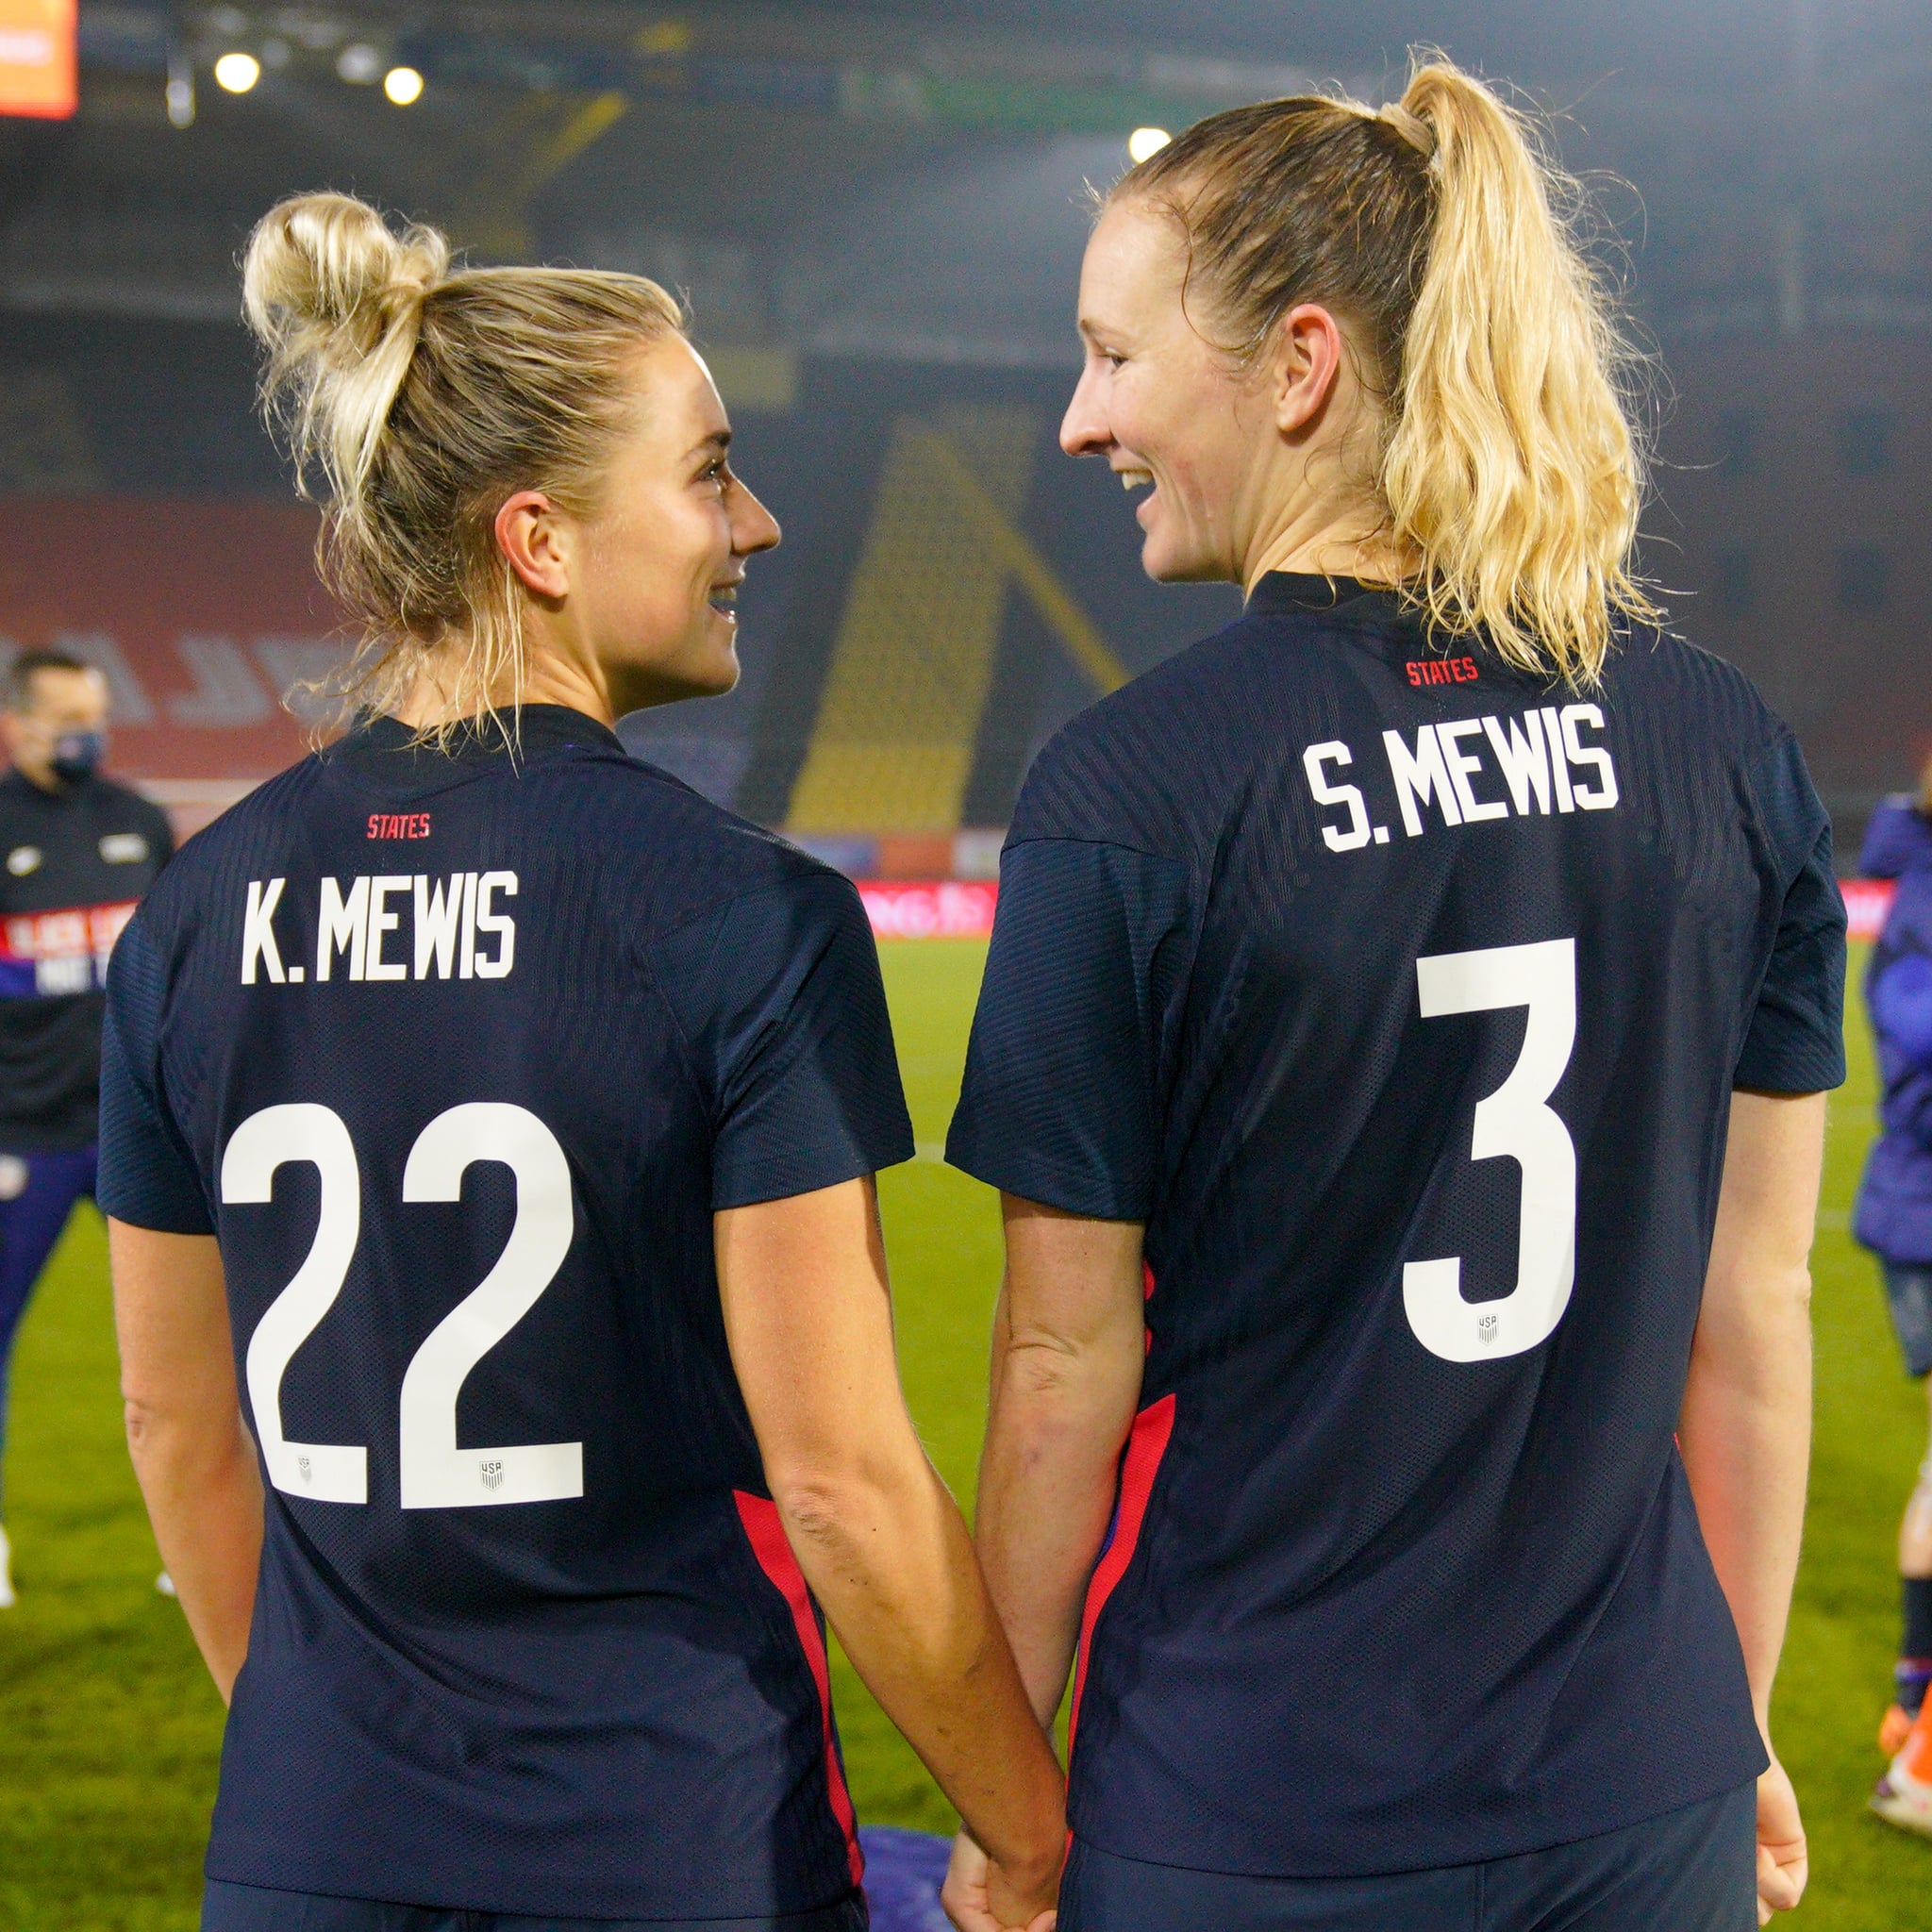 Kristie Mewis plays a statement game for the USWNT as the clock